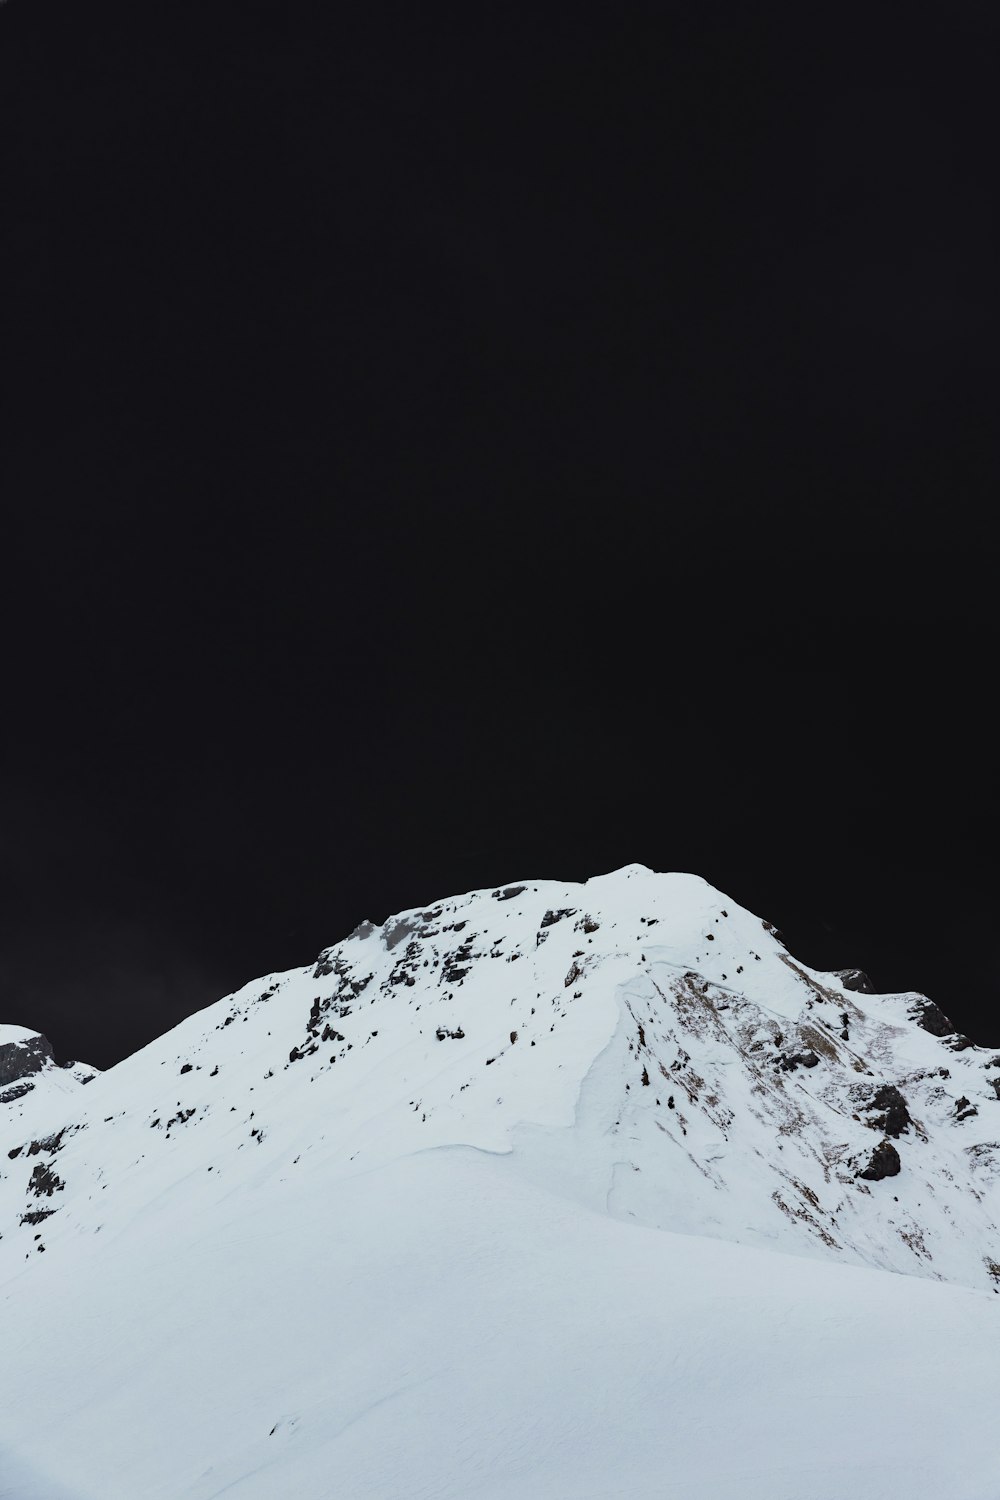 photography of snow-capped mountain